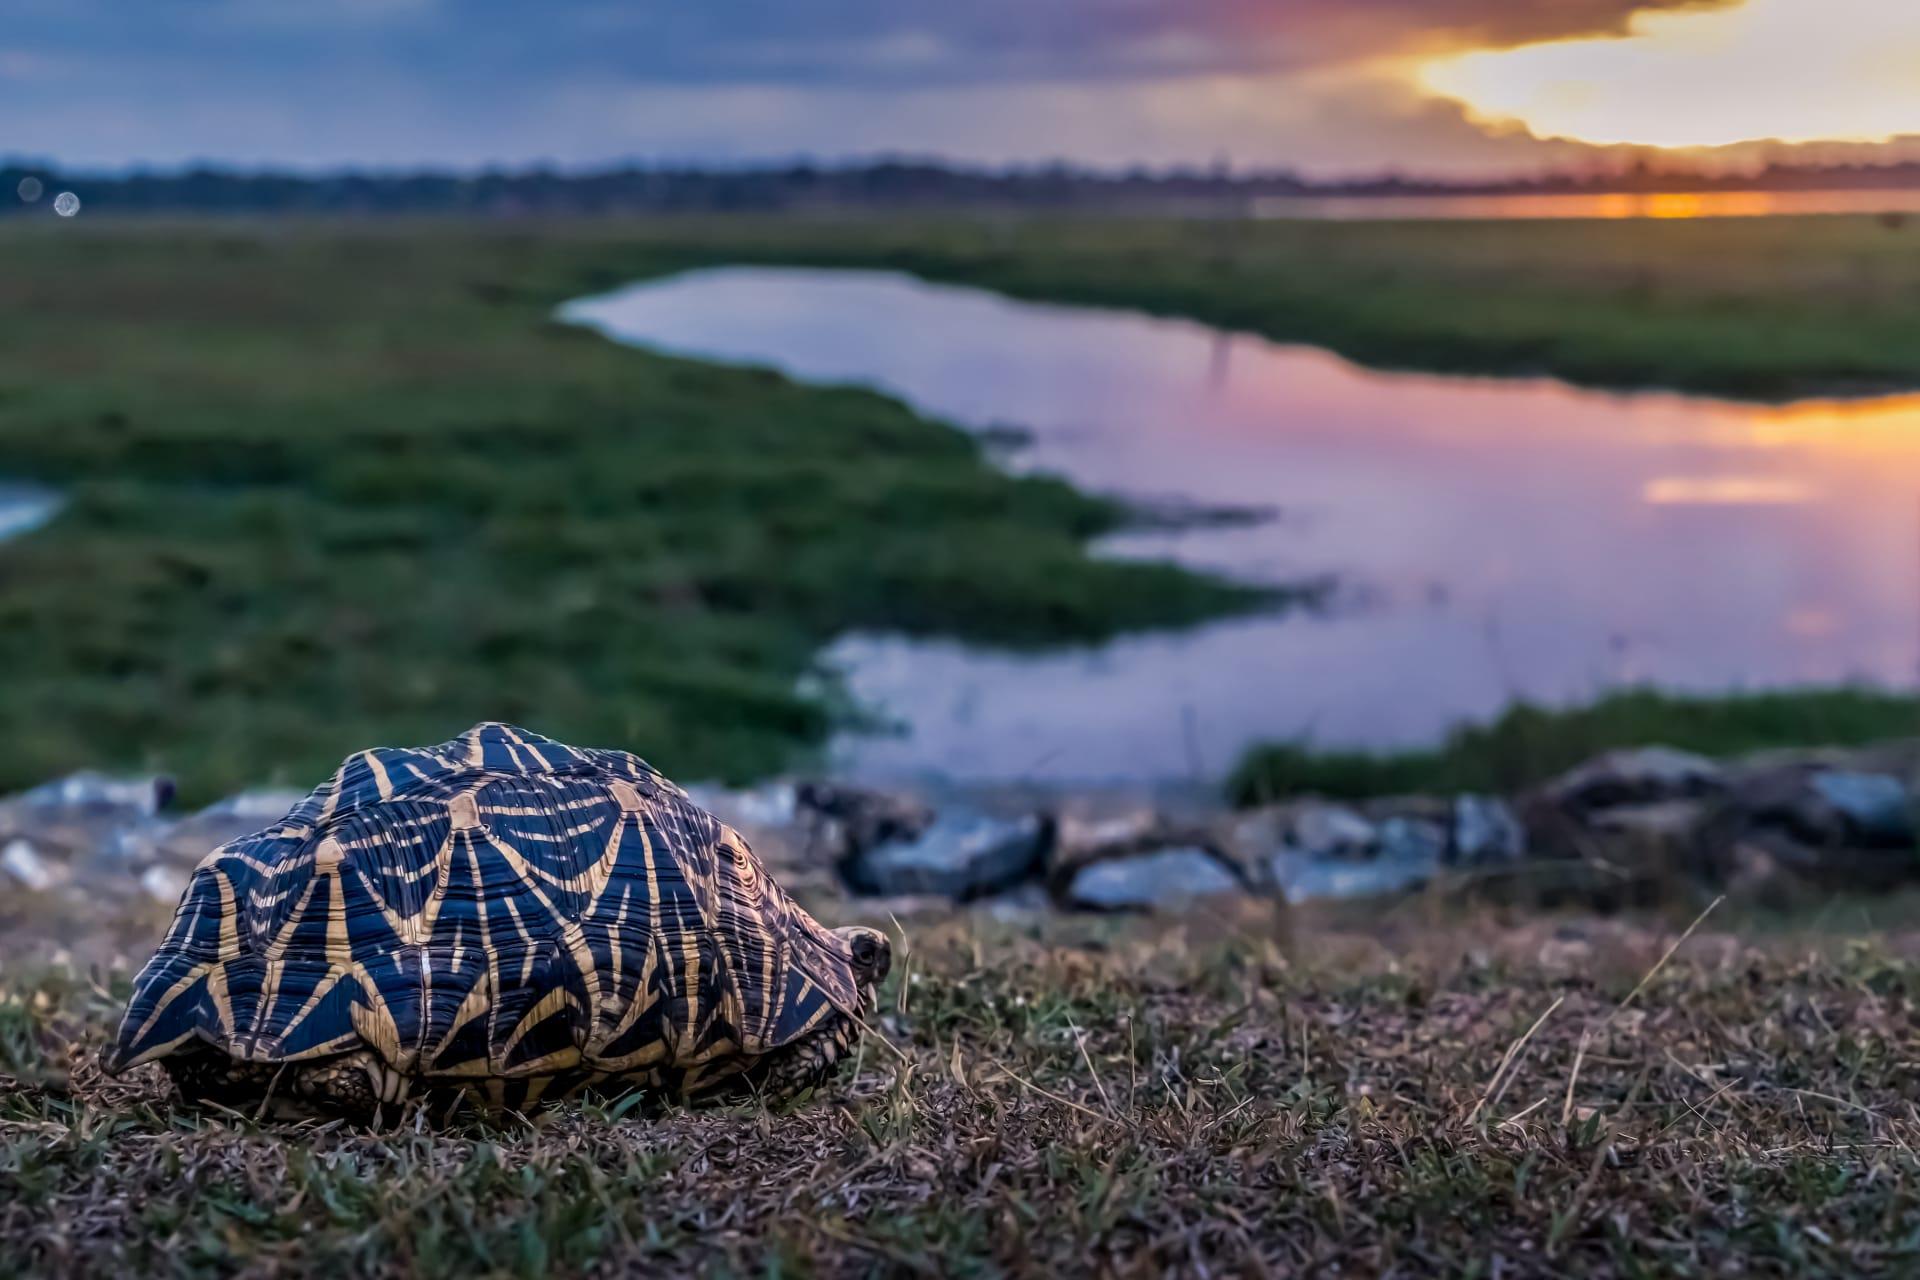 Indian star tortoise pictures